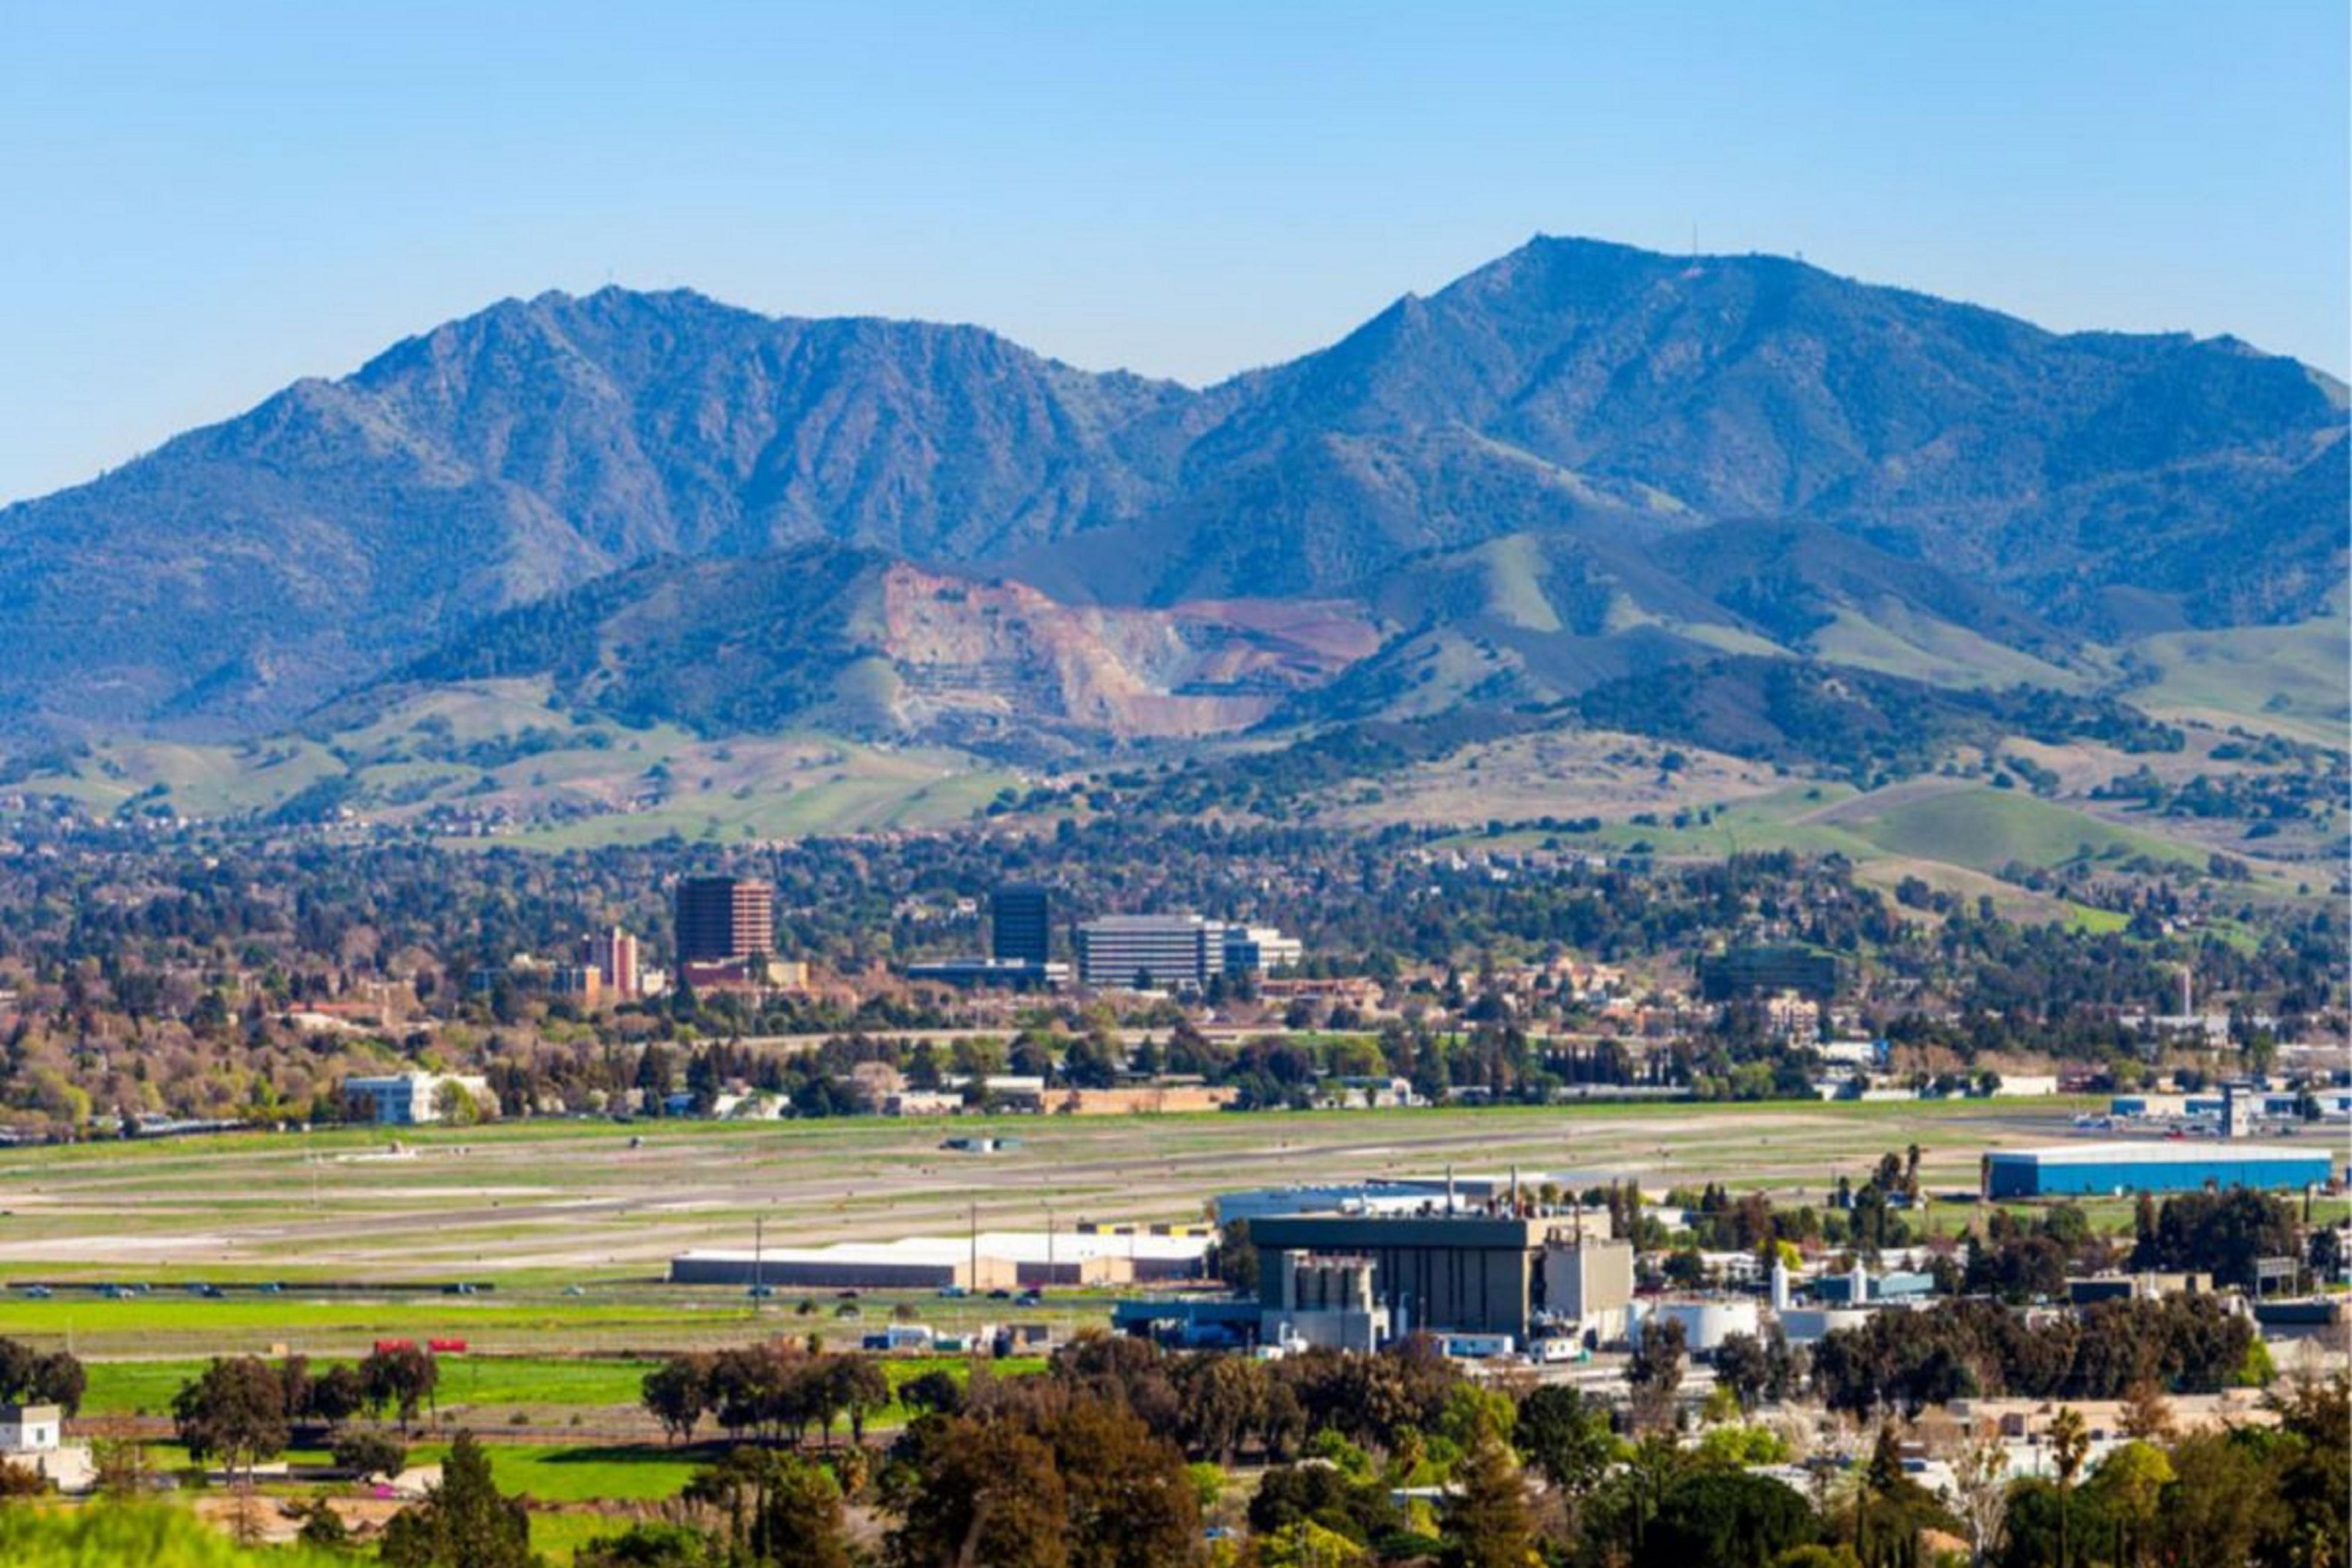 Take in scenic views of Mt. Diablo while staying in Concord.